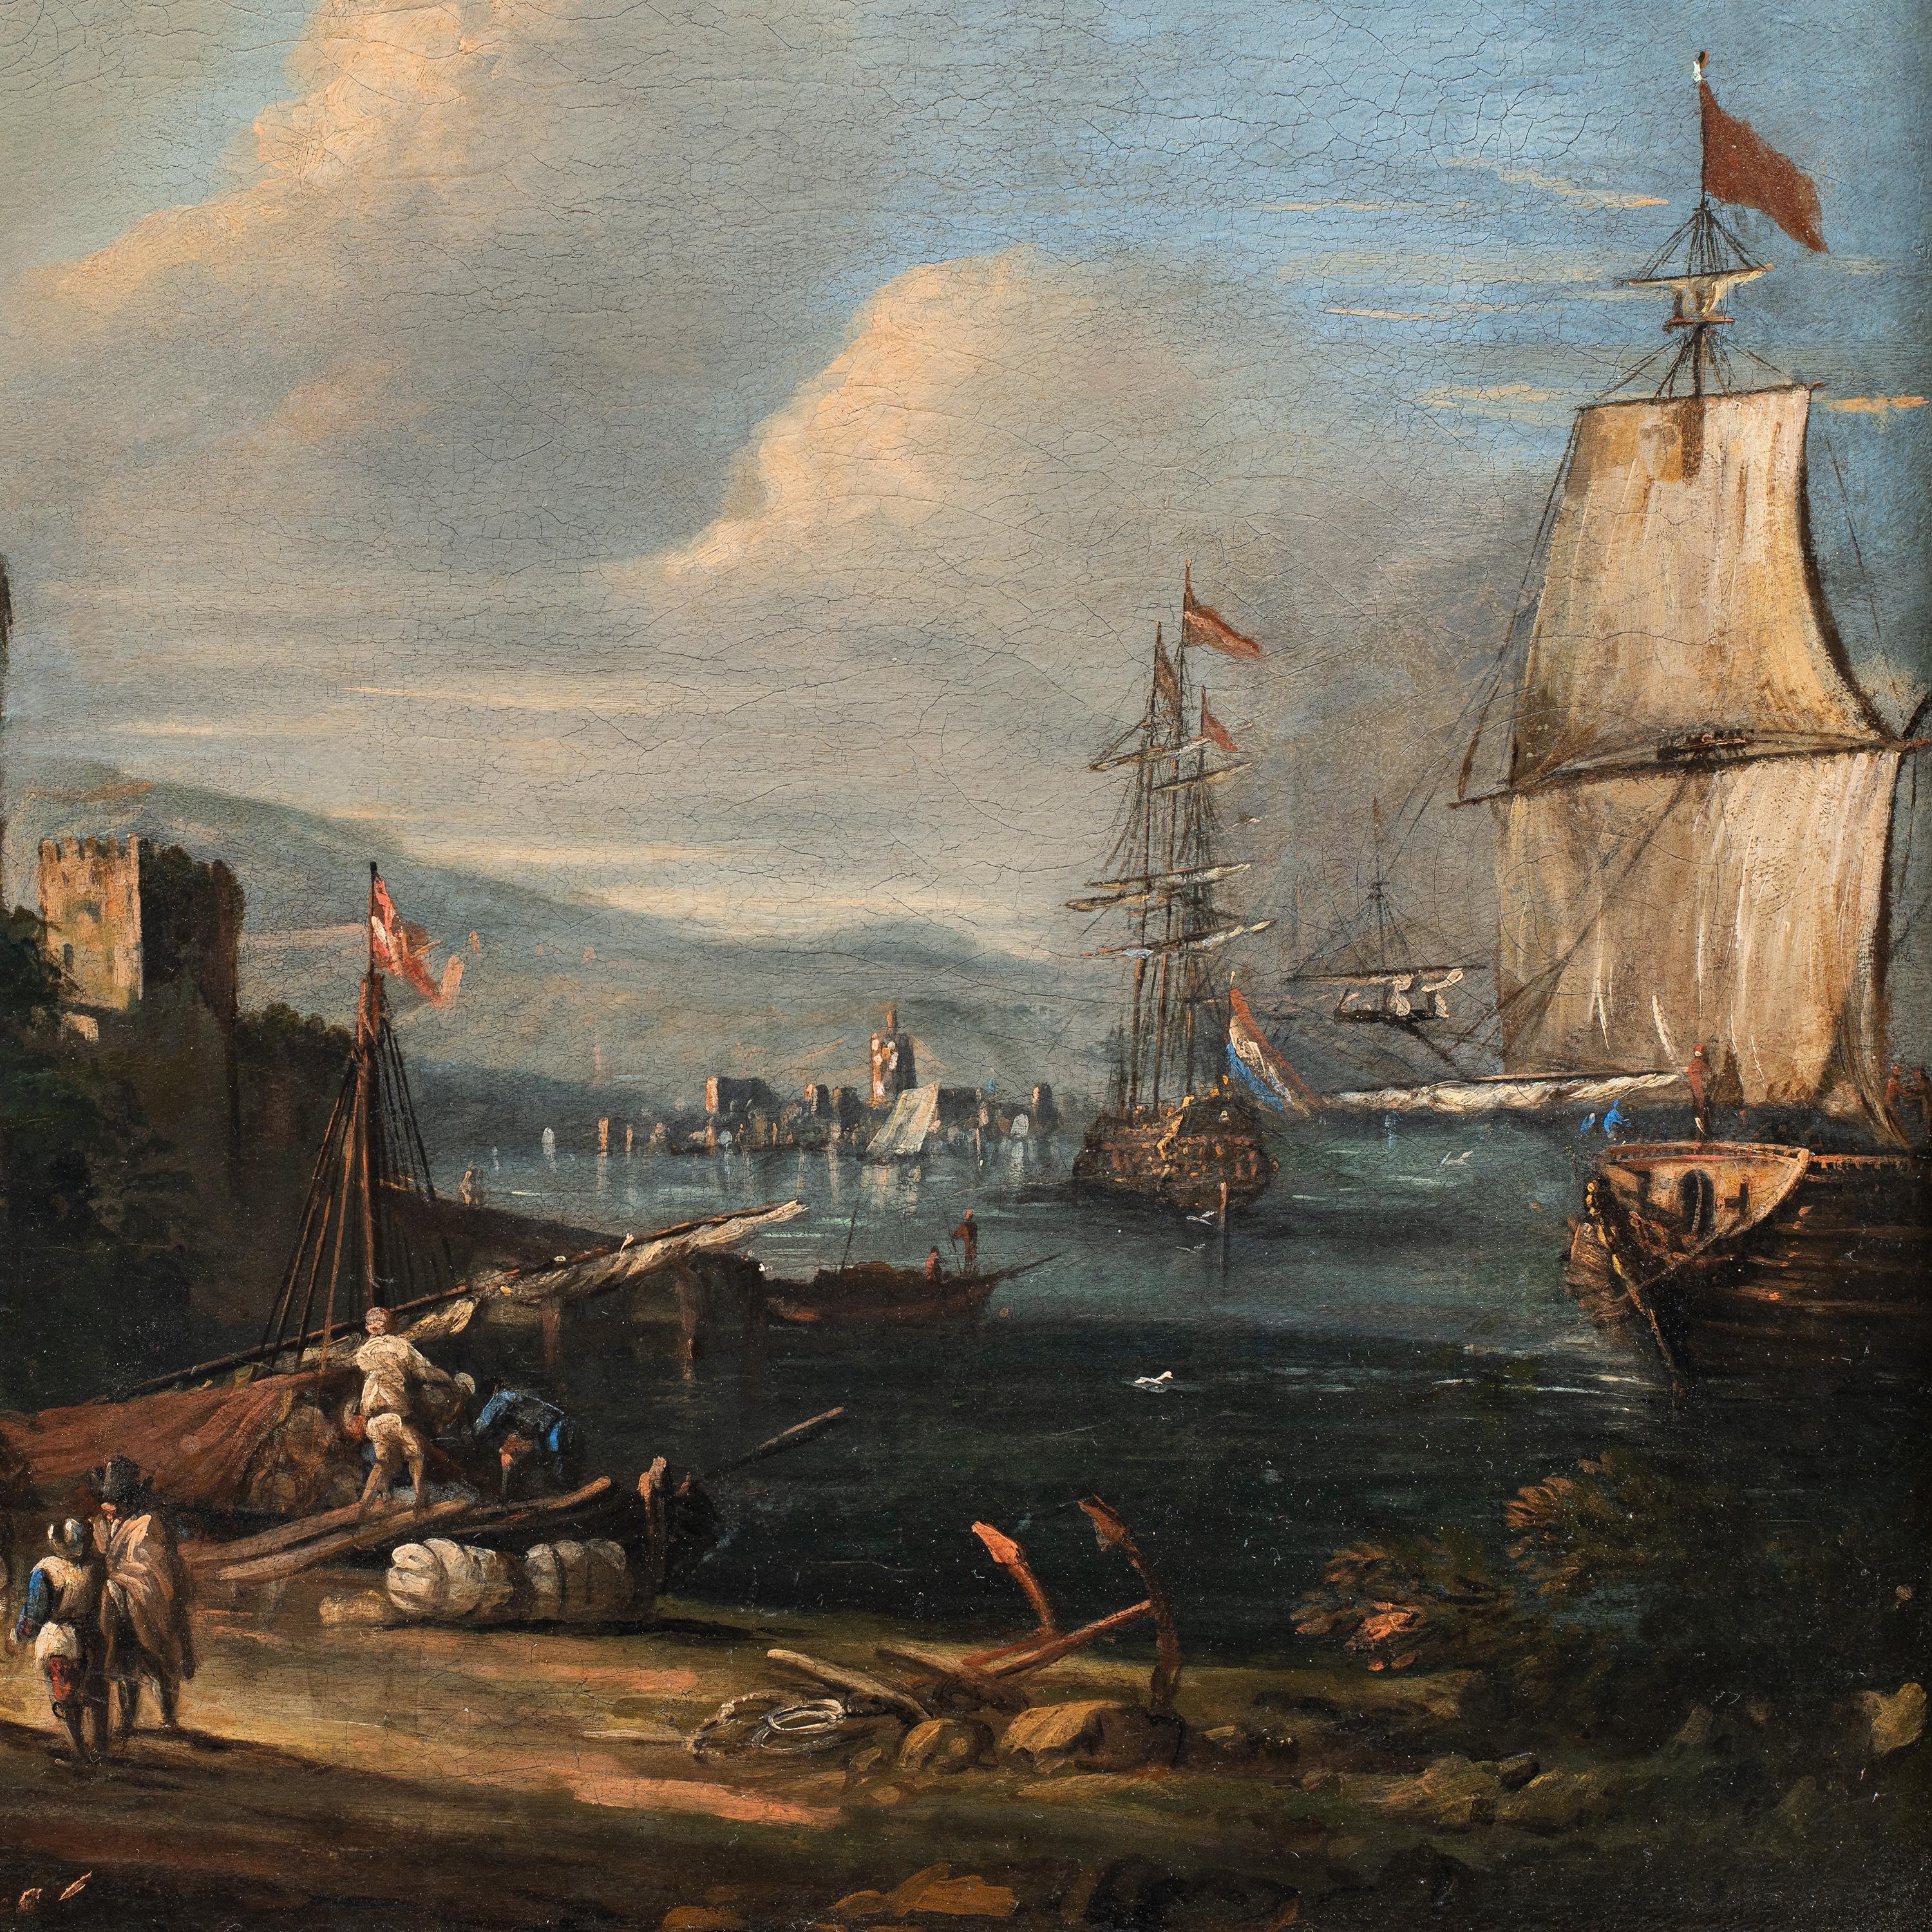 Johann Anton Eismann (Salzburg 1604 - Venice 1698) - Port view with characters.

49.5 x 72 cm without frame, 58 x 82 cm with frame.

Antique oil painting on canvas, in a wooden frame.

Condition report: Lined canvas. Good state of conservation of